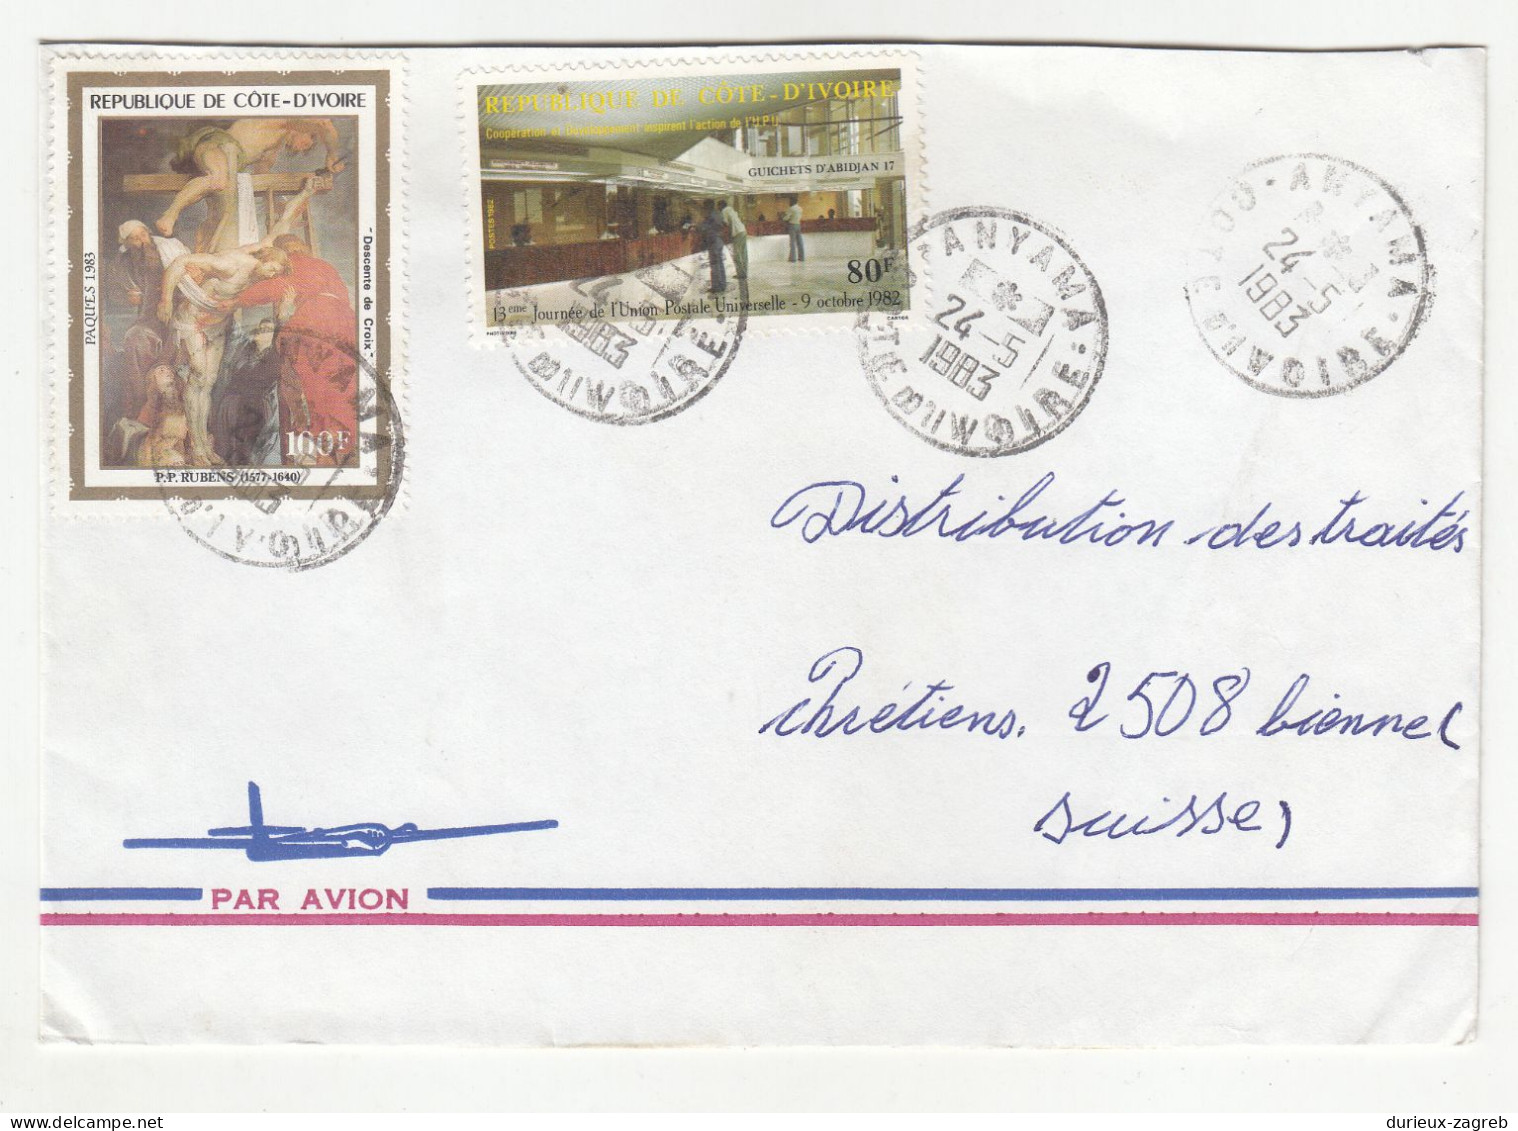 Cote d'Ivoire 12 letter covers posted 1979-1988 to Switzerland b240510